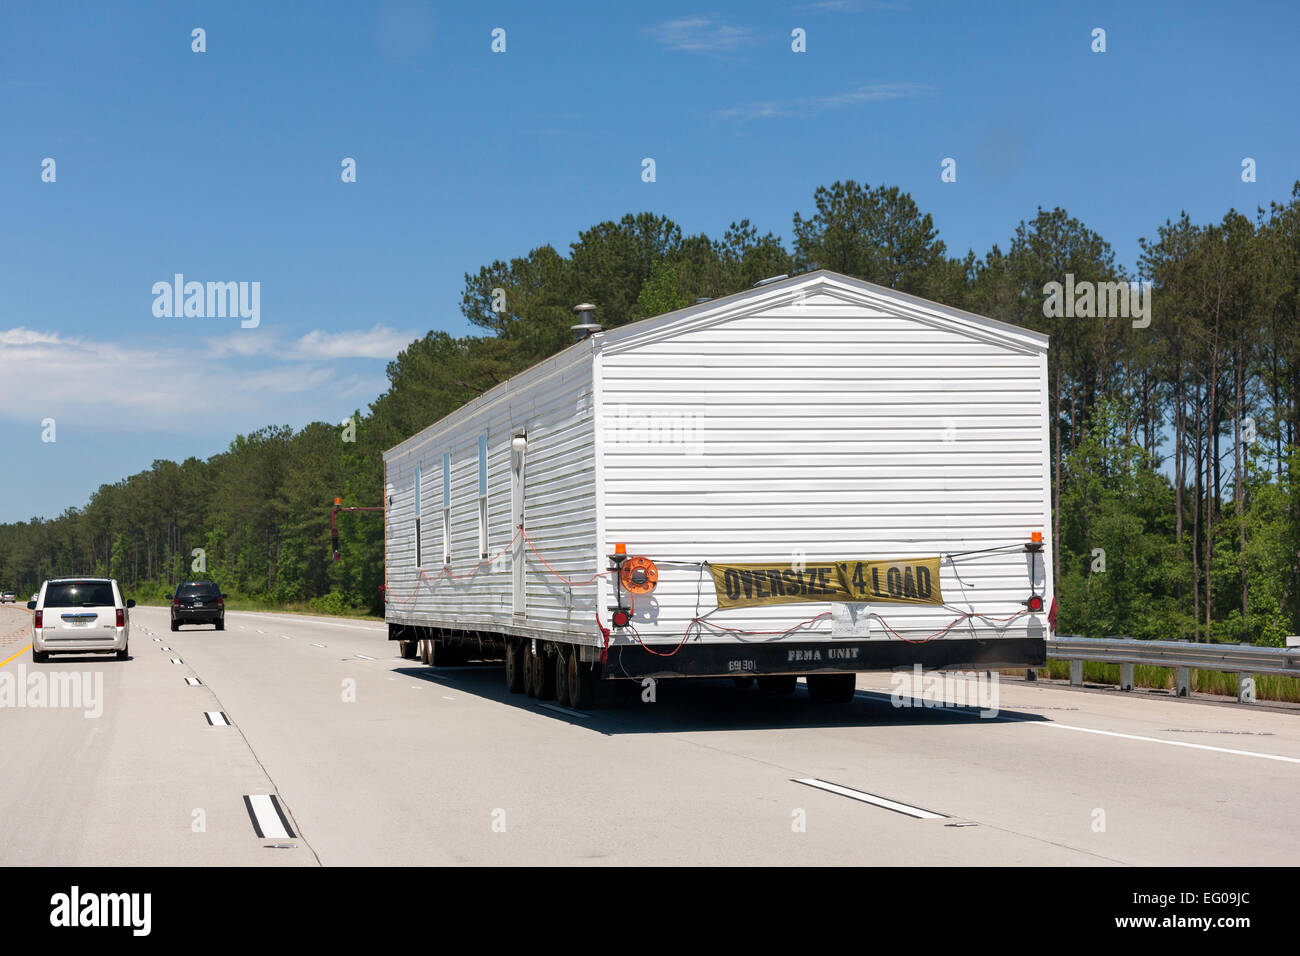 Truck with oversize load: moving a FEMA Trailer Home Unit on the I-85 Interstate highway near Grantville GA. Stock Photo